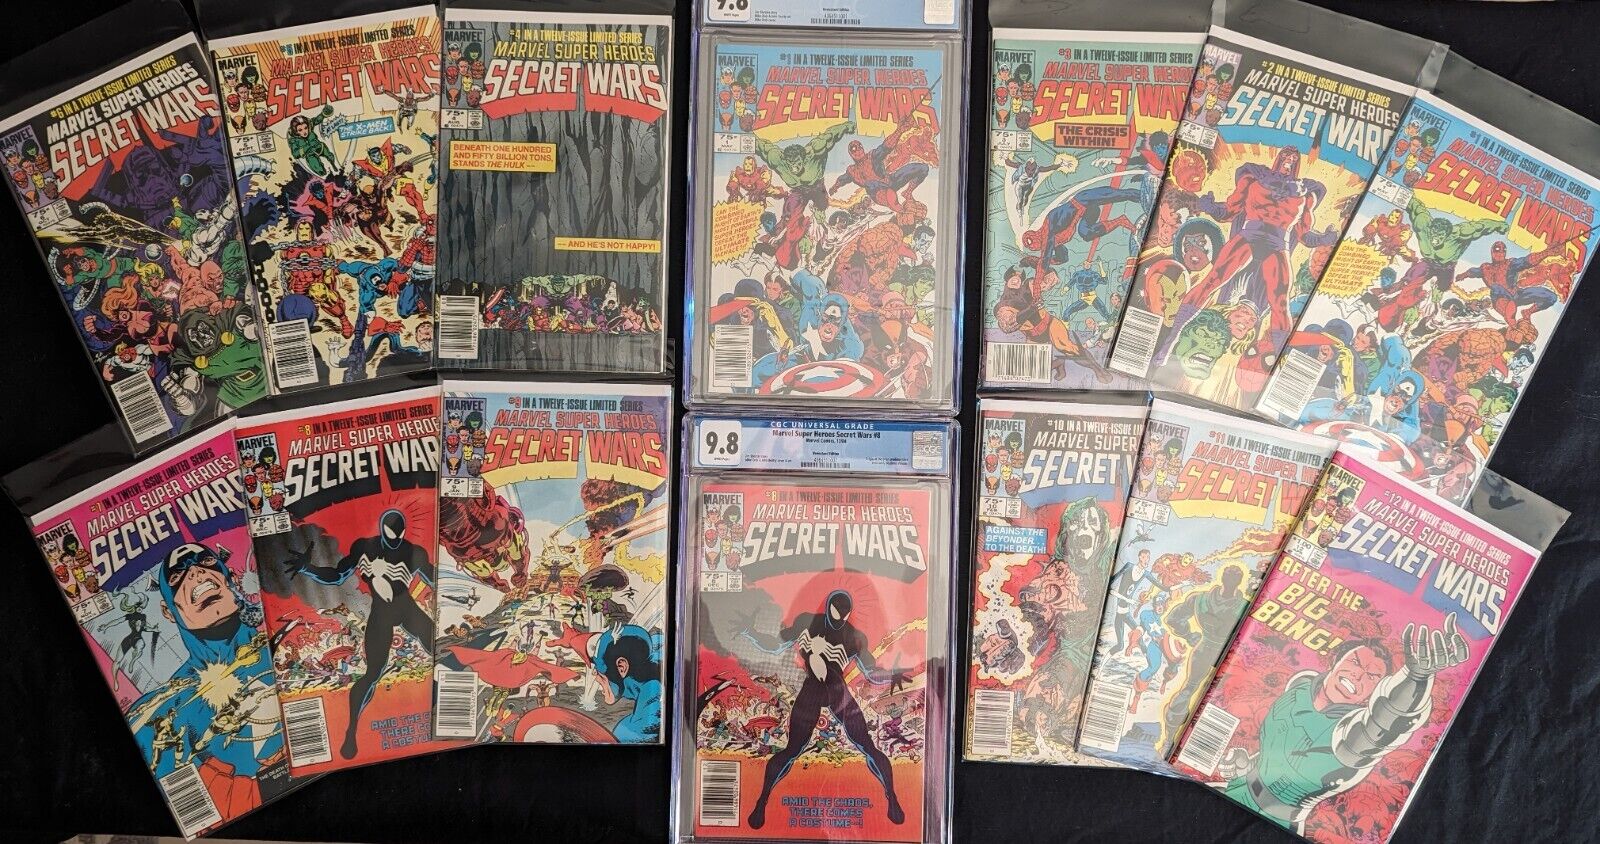 Marvel Secret Wars full set of raw copies plus 9.8 #1 and 9.8 #8 NEWSSTAND RARE